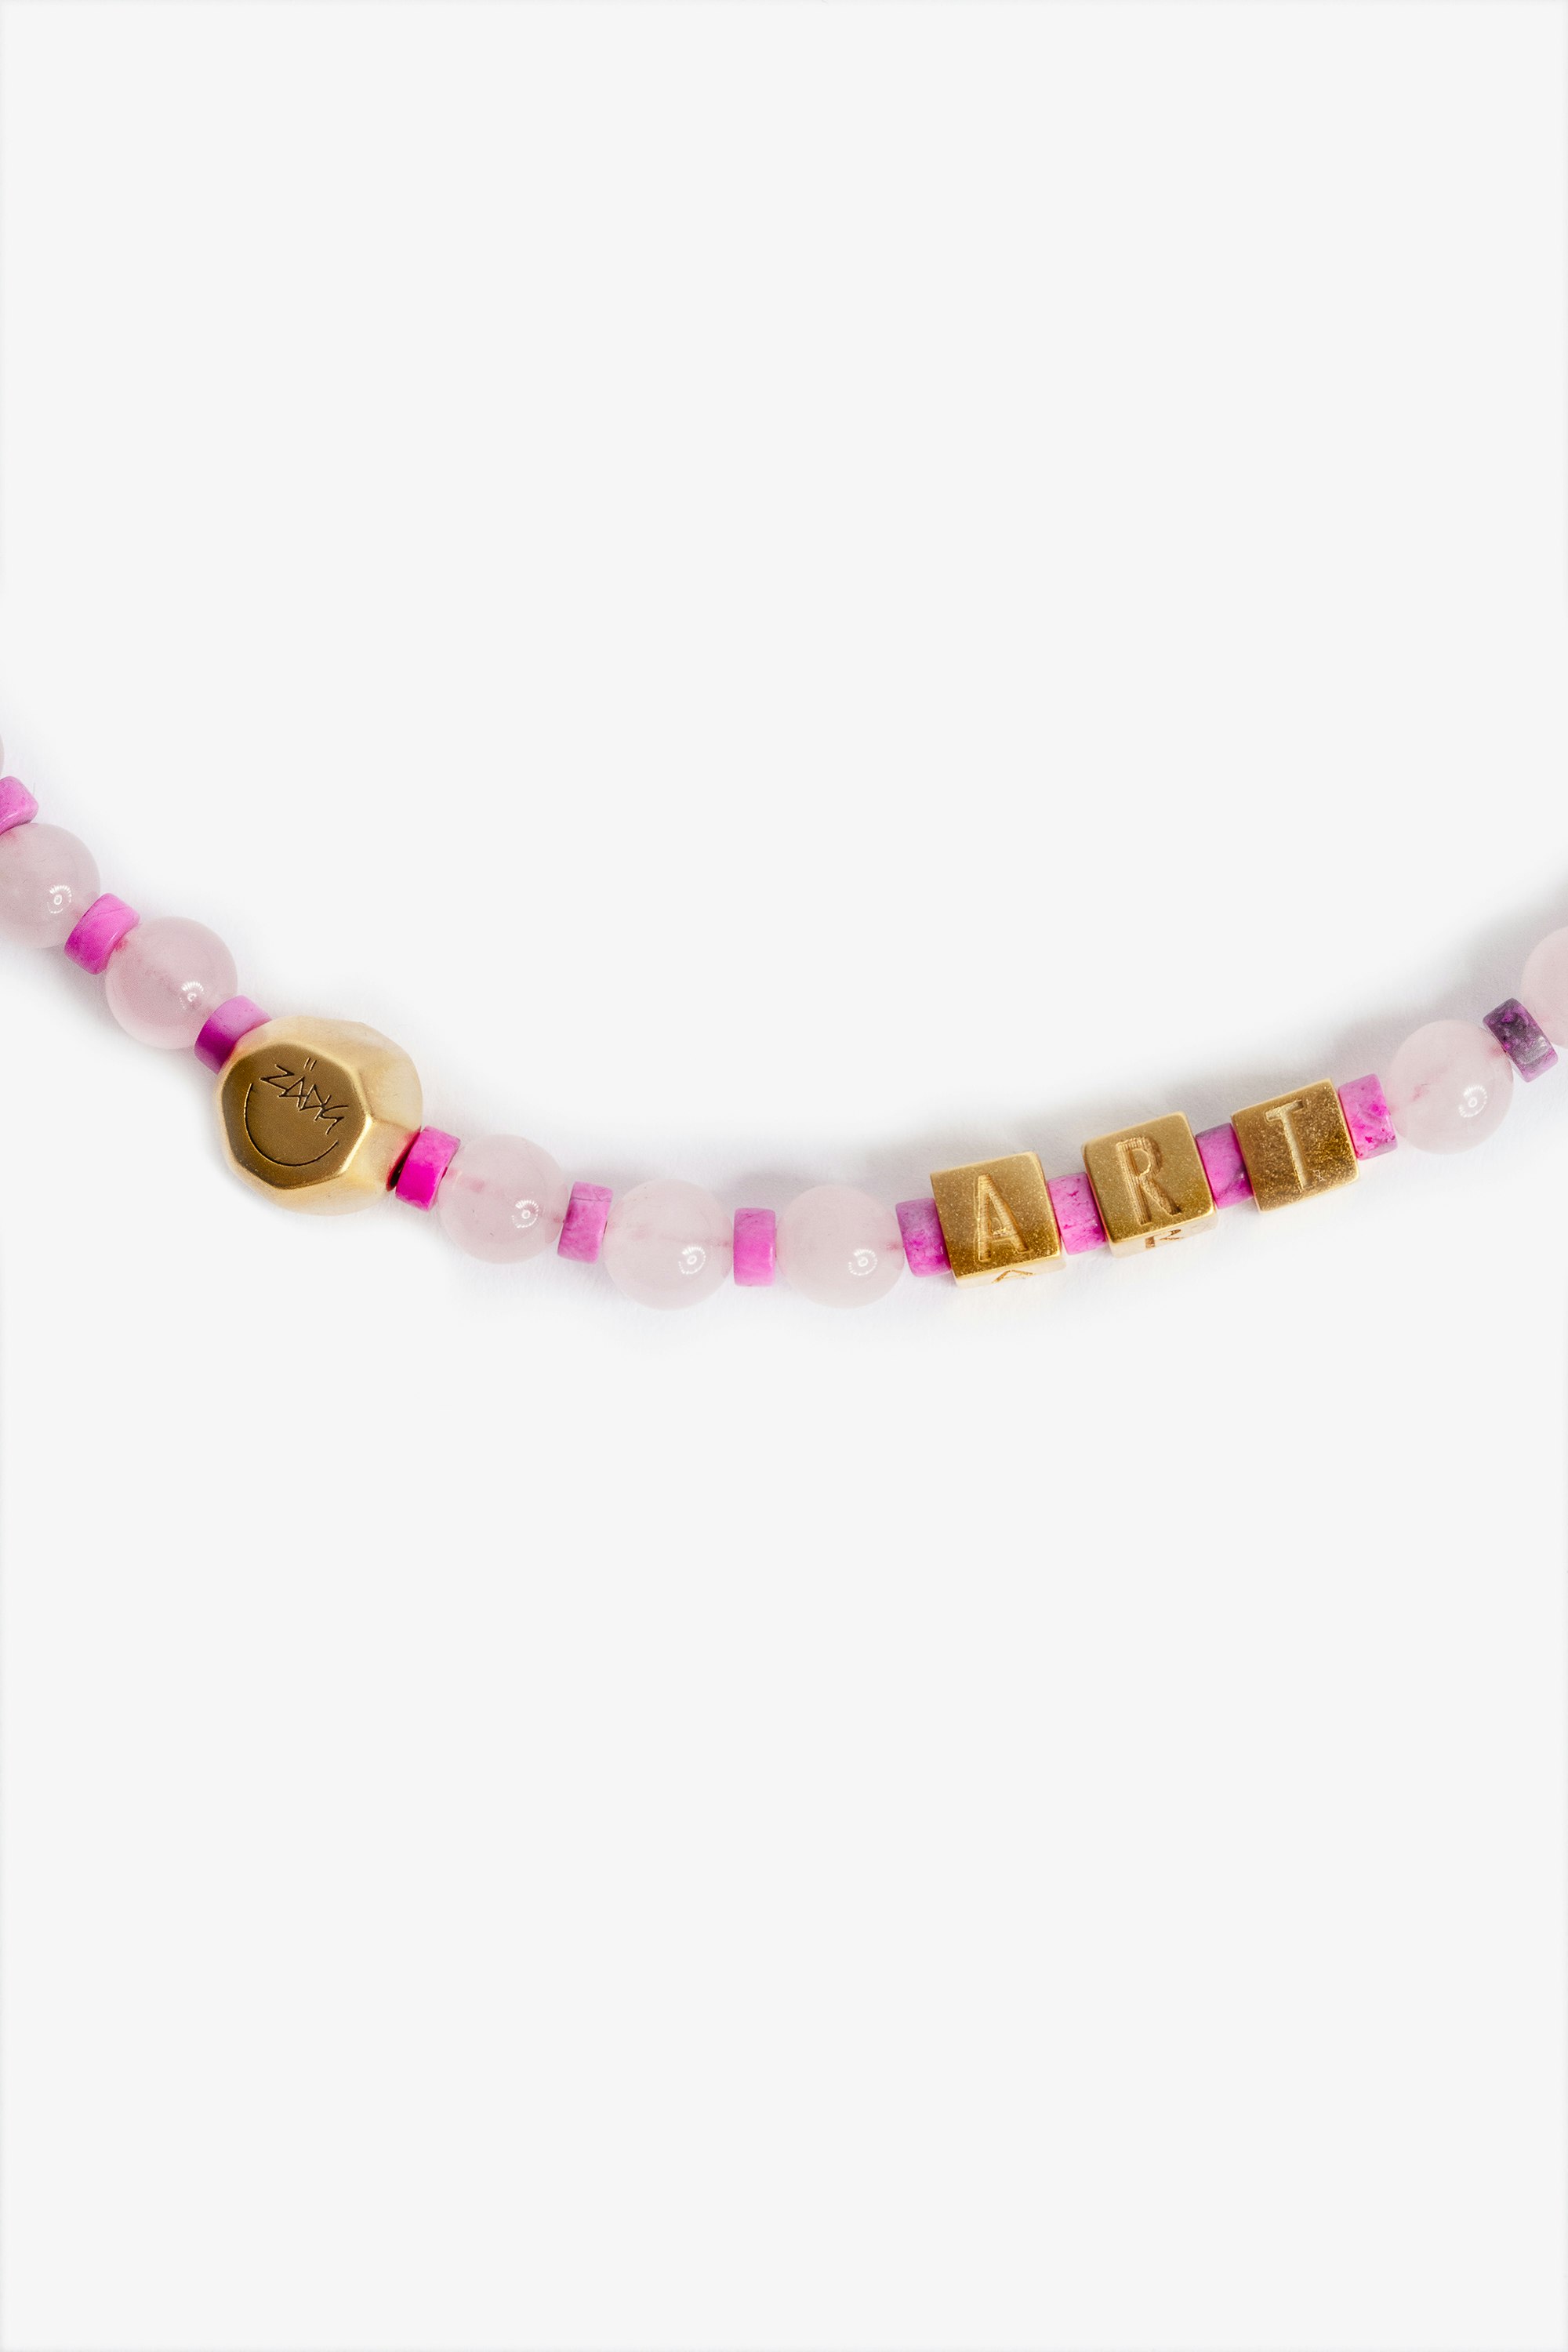 Mix n Match Art Message ネックレス Women’s Heart short necklace with pink and gold beads